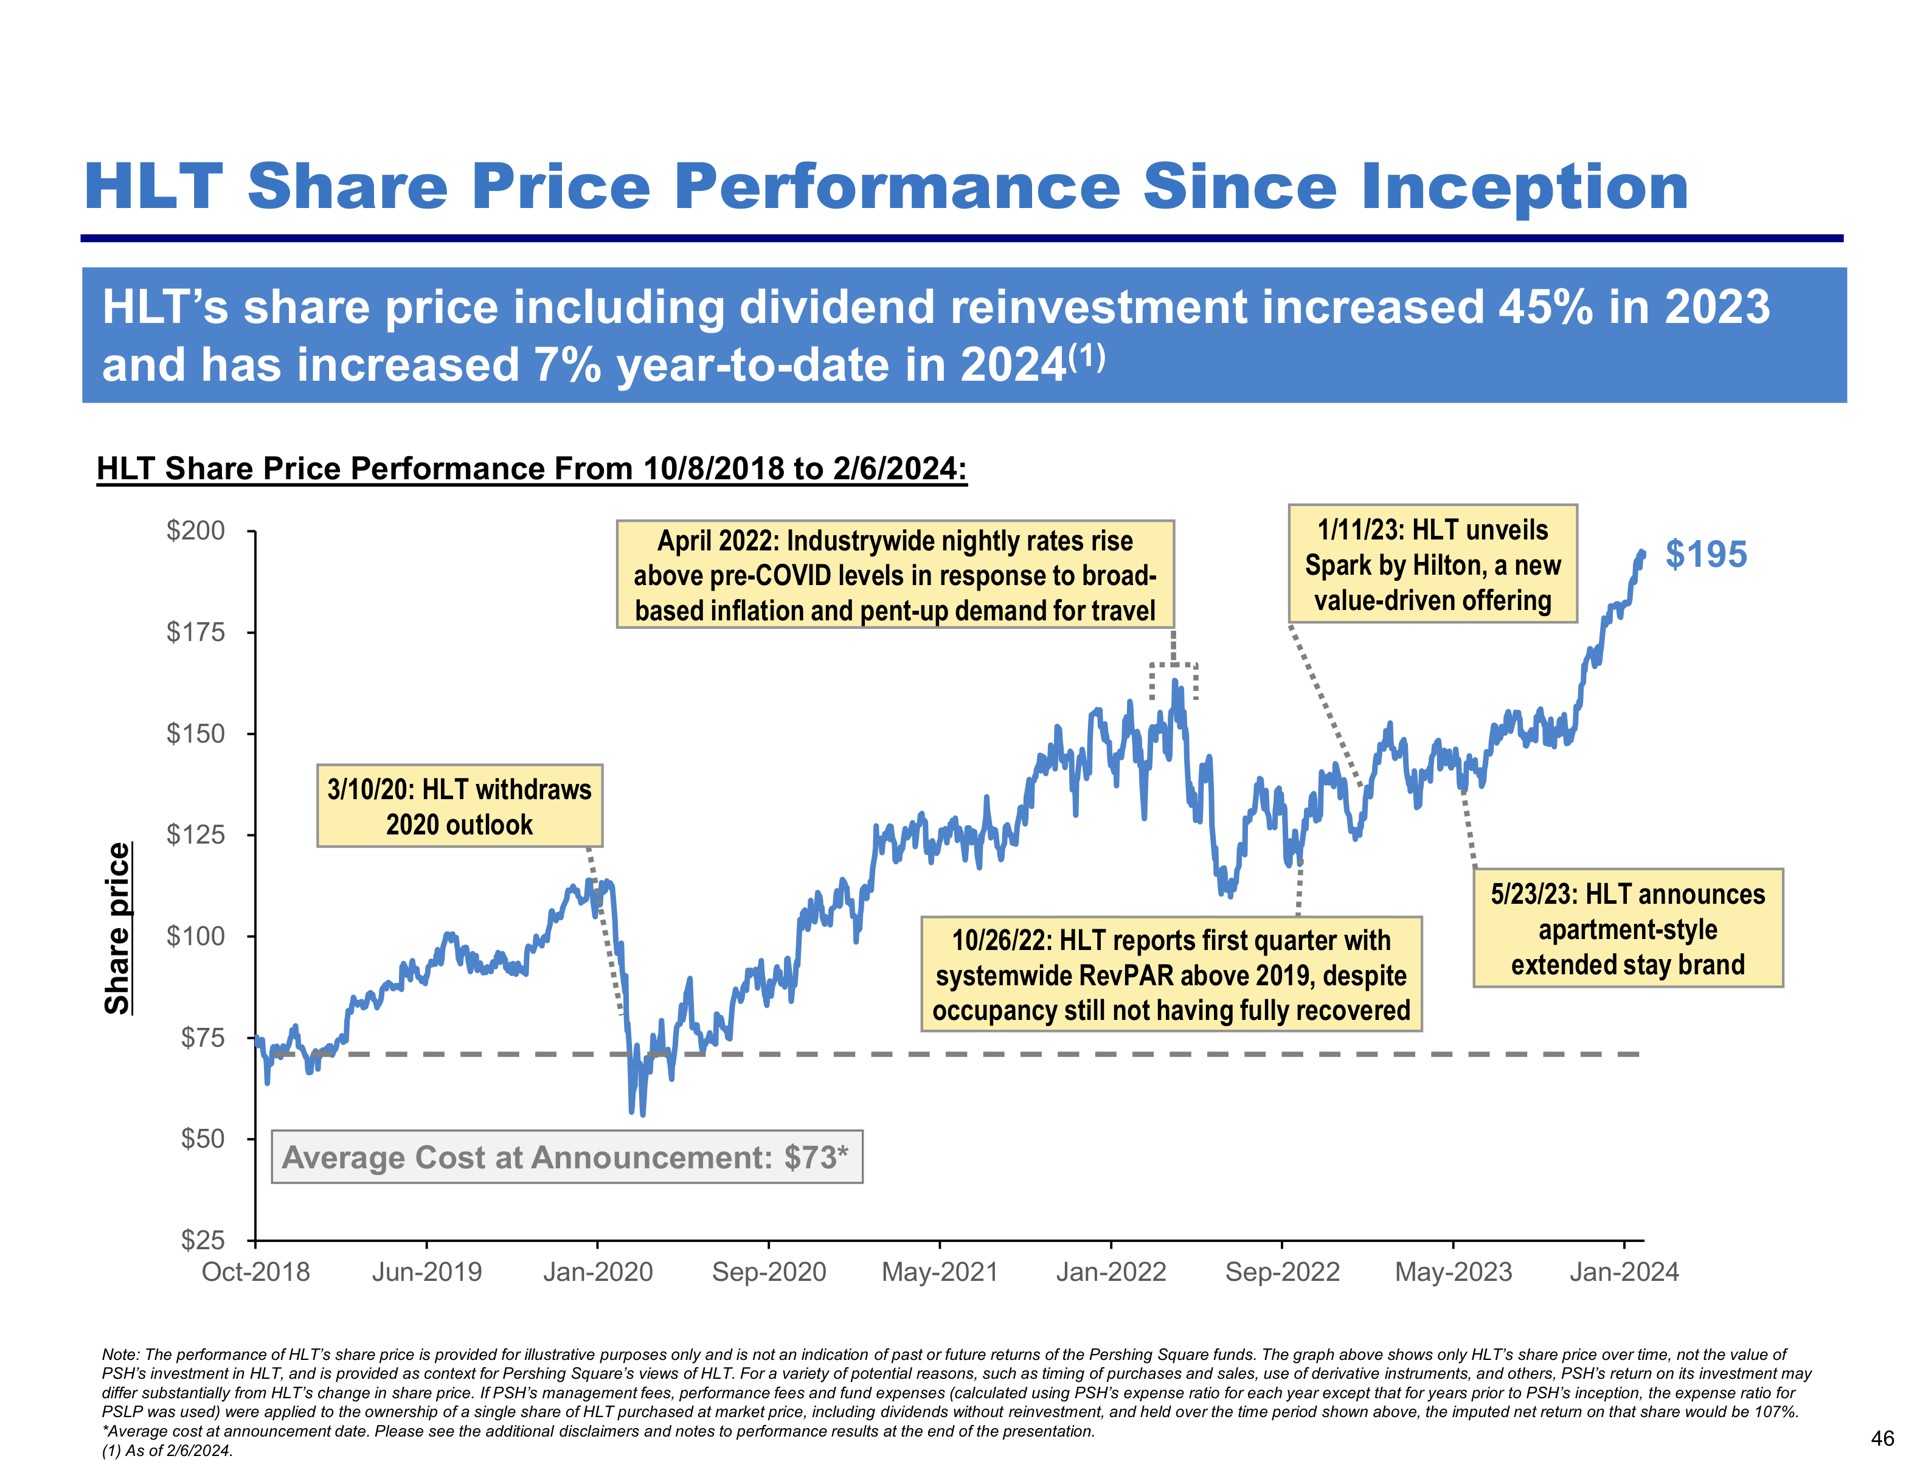 share price performance since inception share price including dividend reinvestment increased in and has increased year to date in based inflation pent up demand for travel value driven offering | Pershing Square